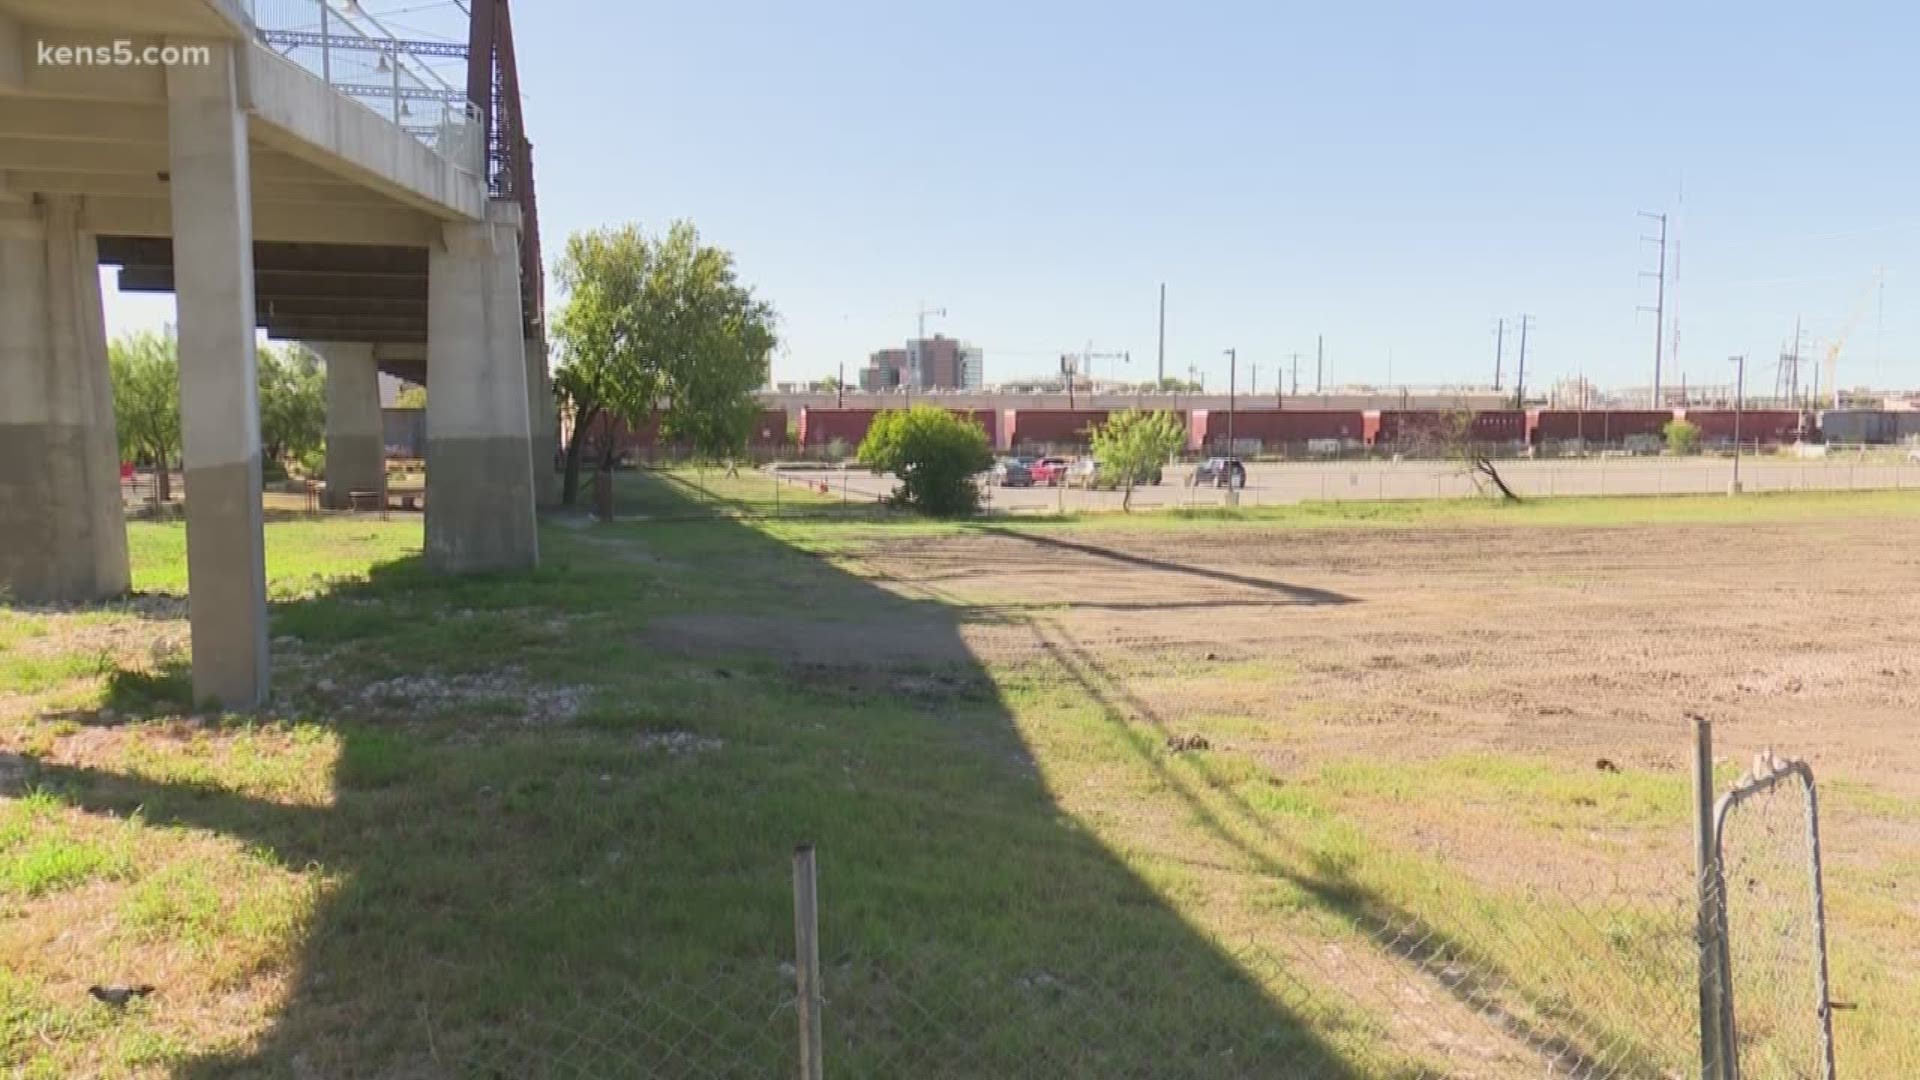 City of San Antonio held the first of three public meetings to get the community’s input on the newest park located by the Hays Street Bridge.